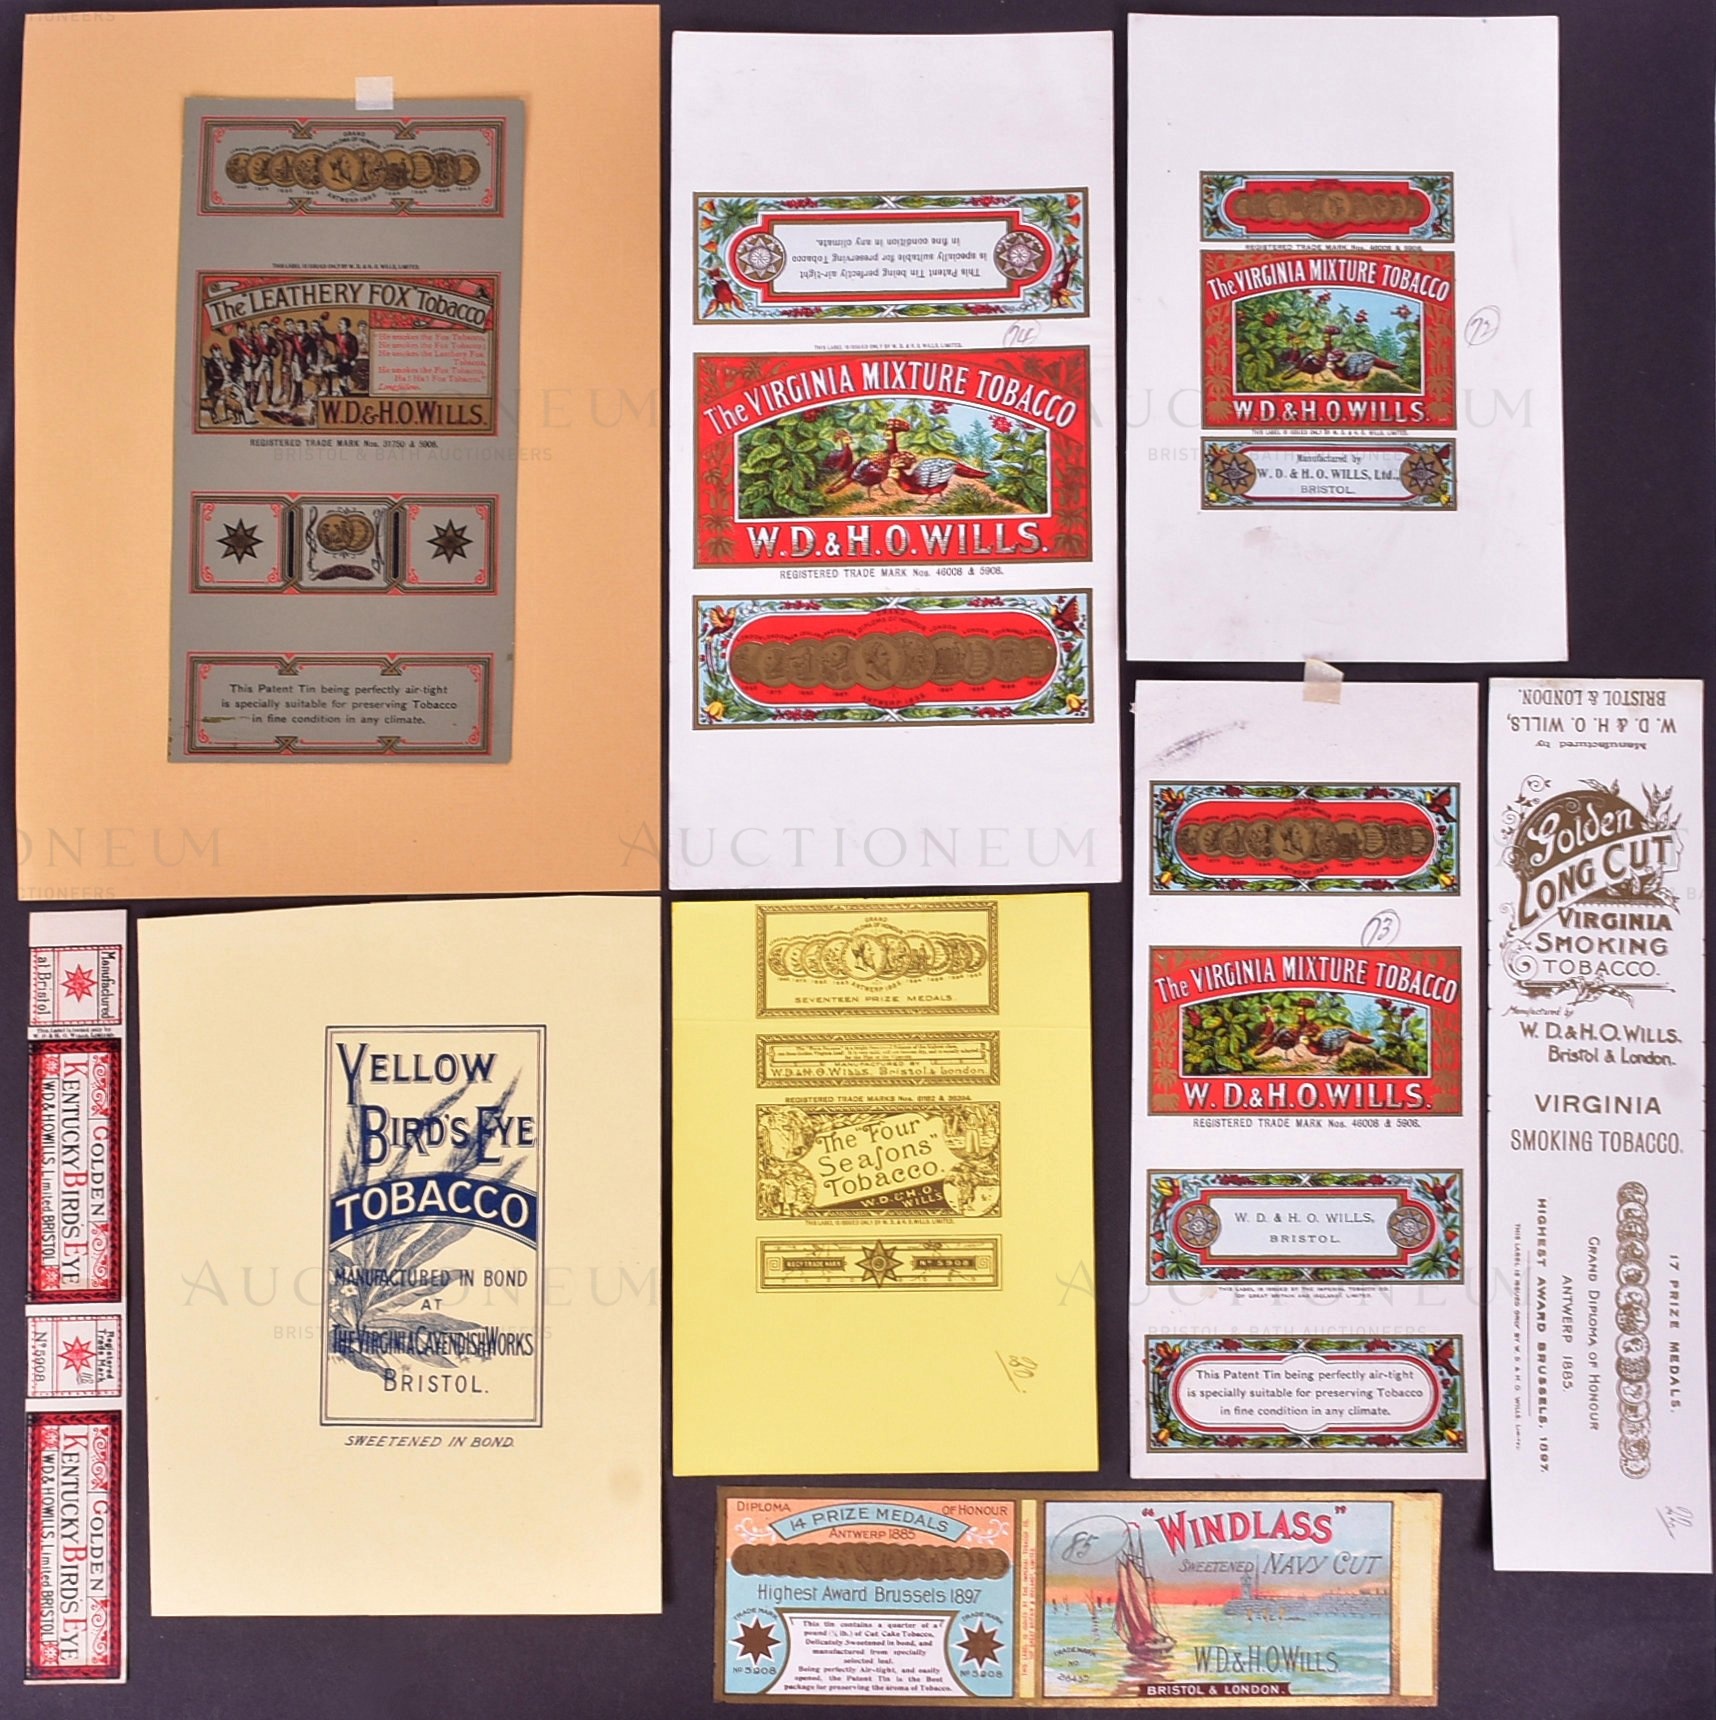 MARDON, SON & HALL - EARLY 20TH CENTURY CIGARETTE PACKET / LABEL DESIGNS